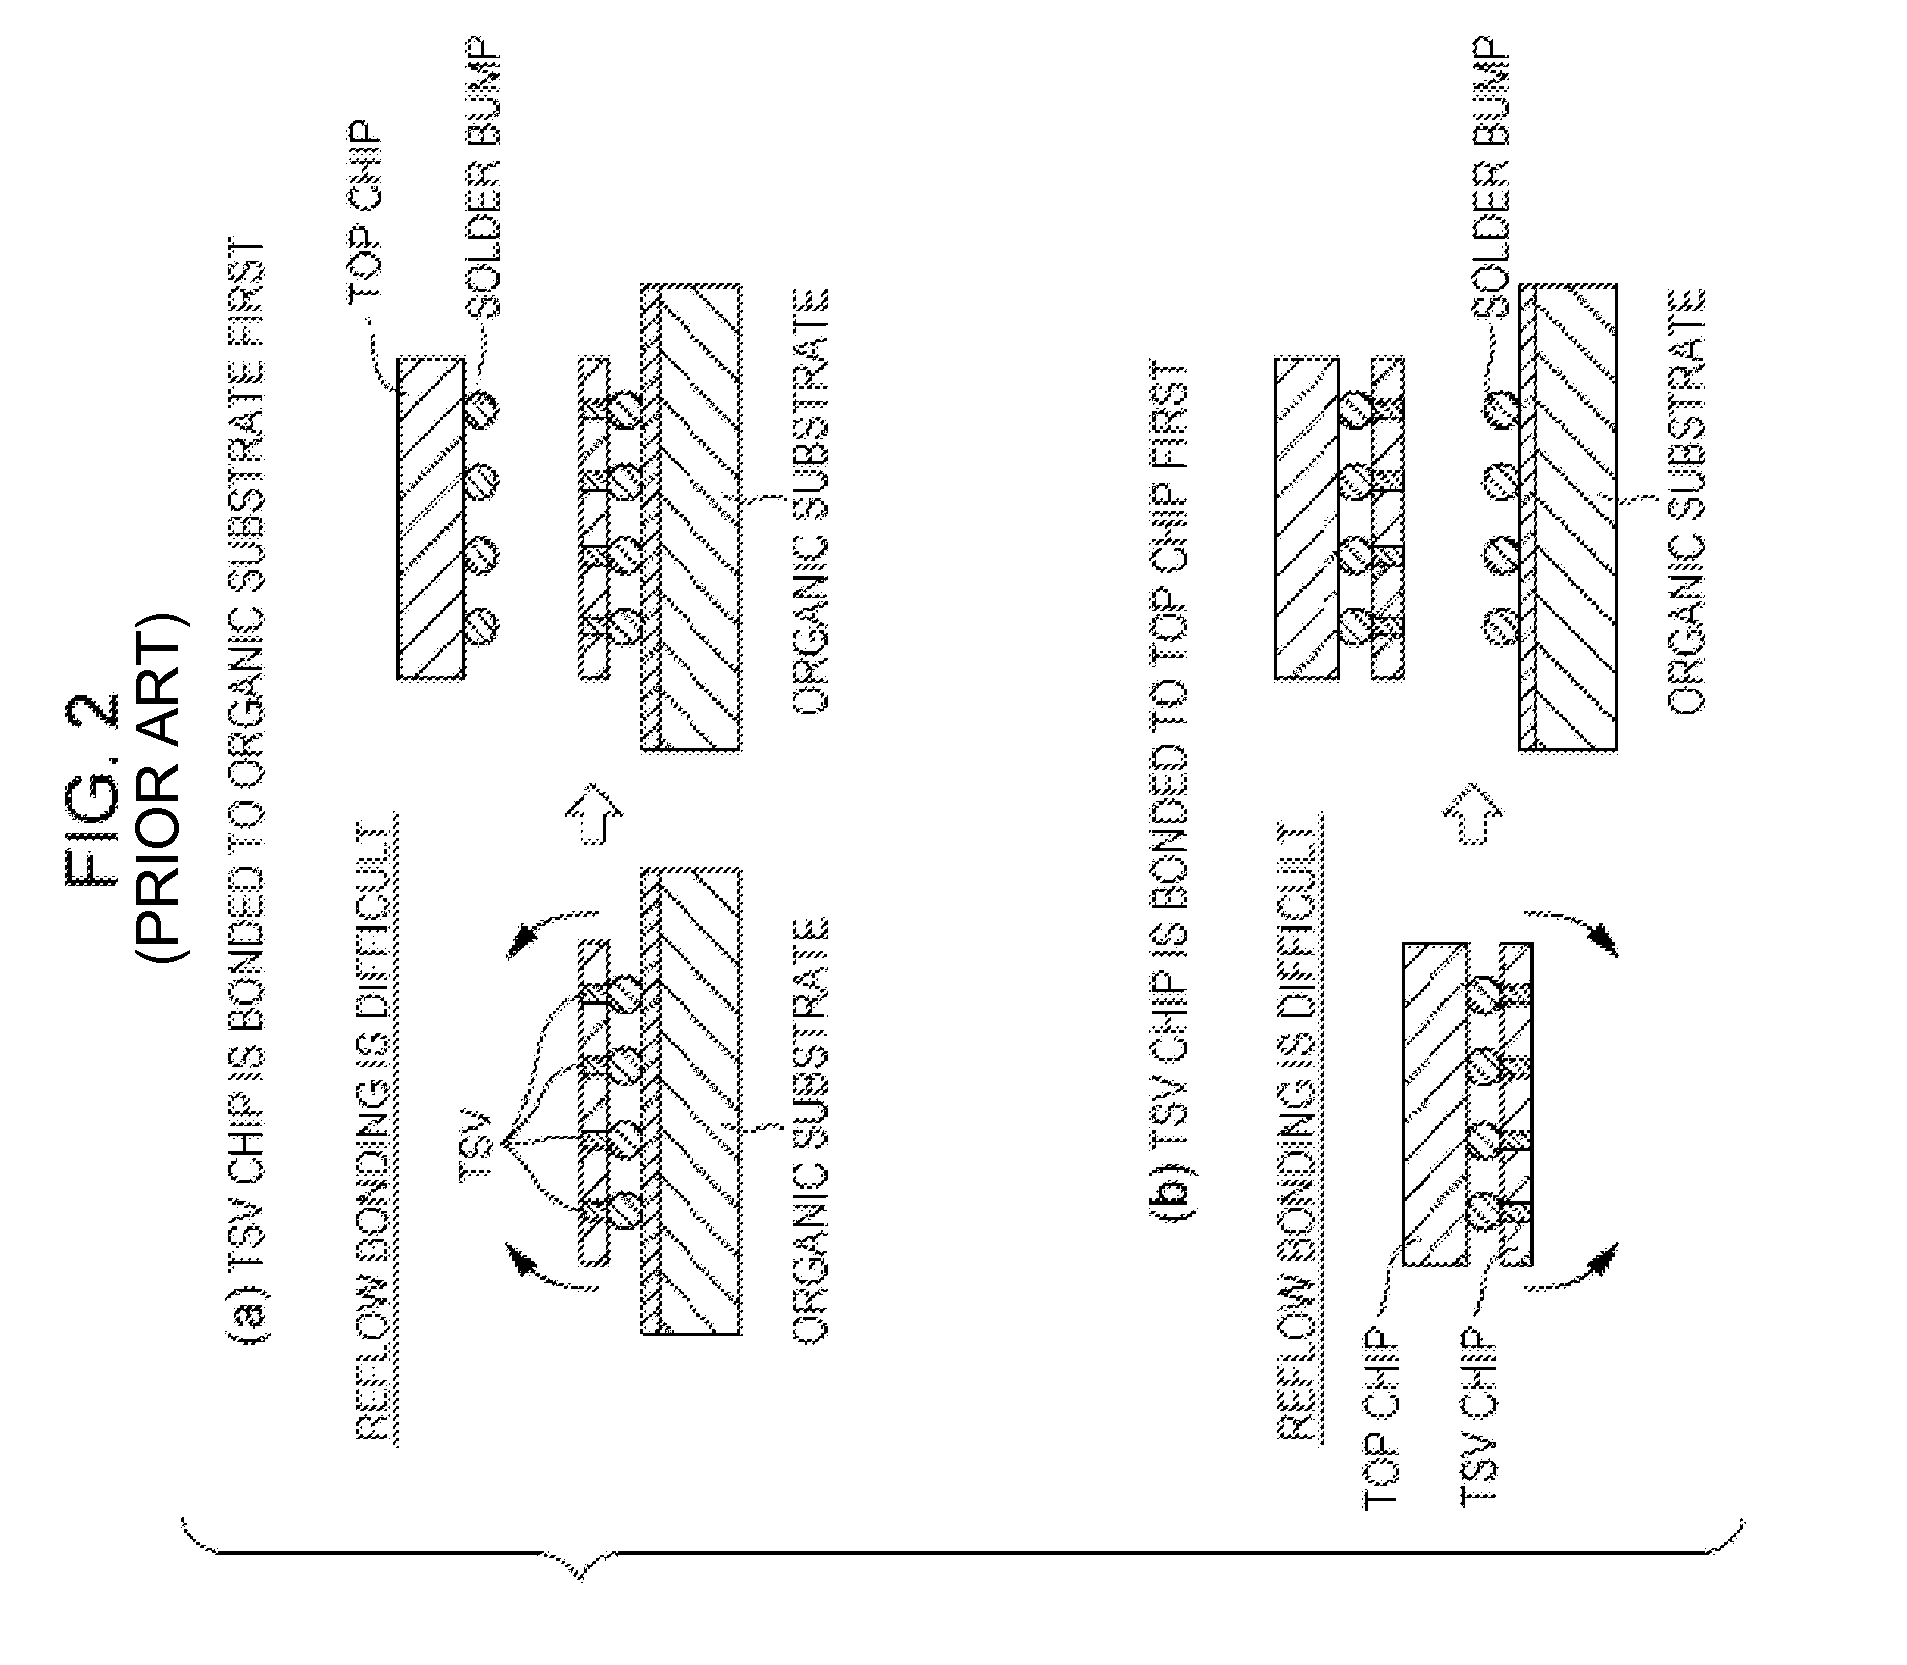 Prevention of warping during handling of chip-on-wafer